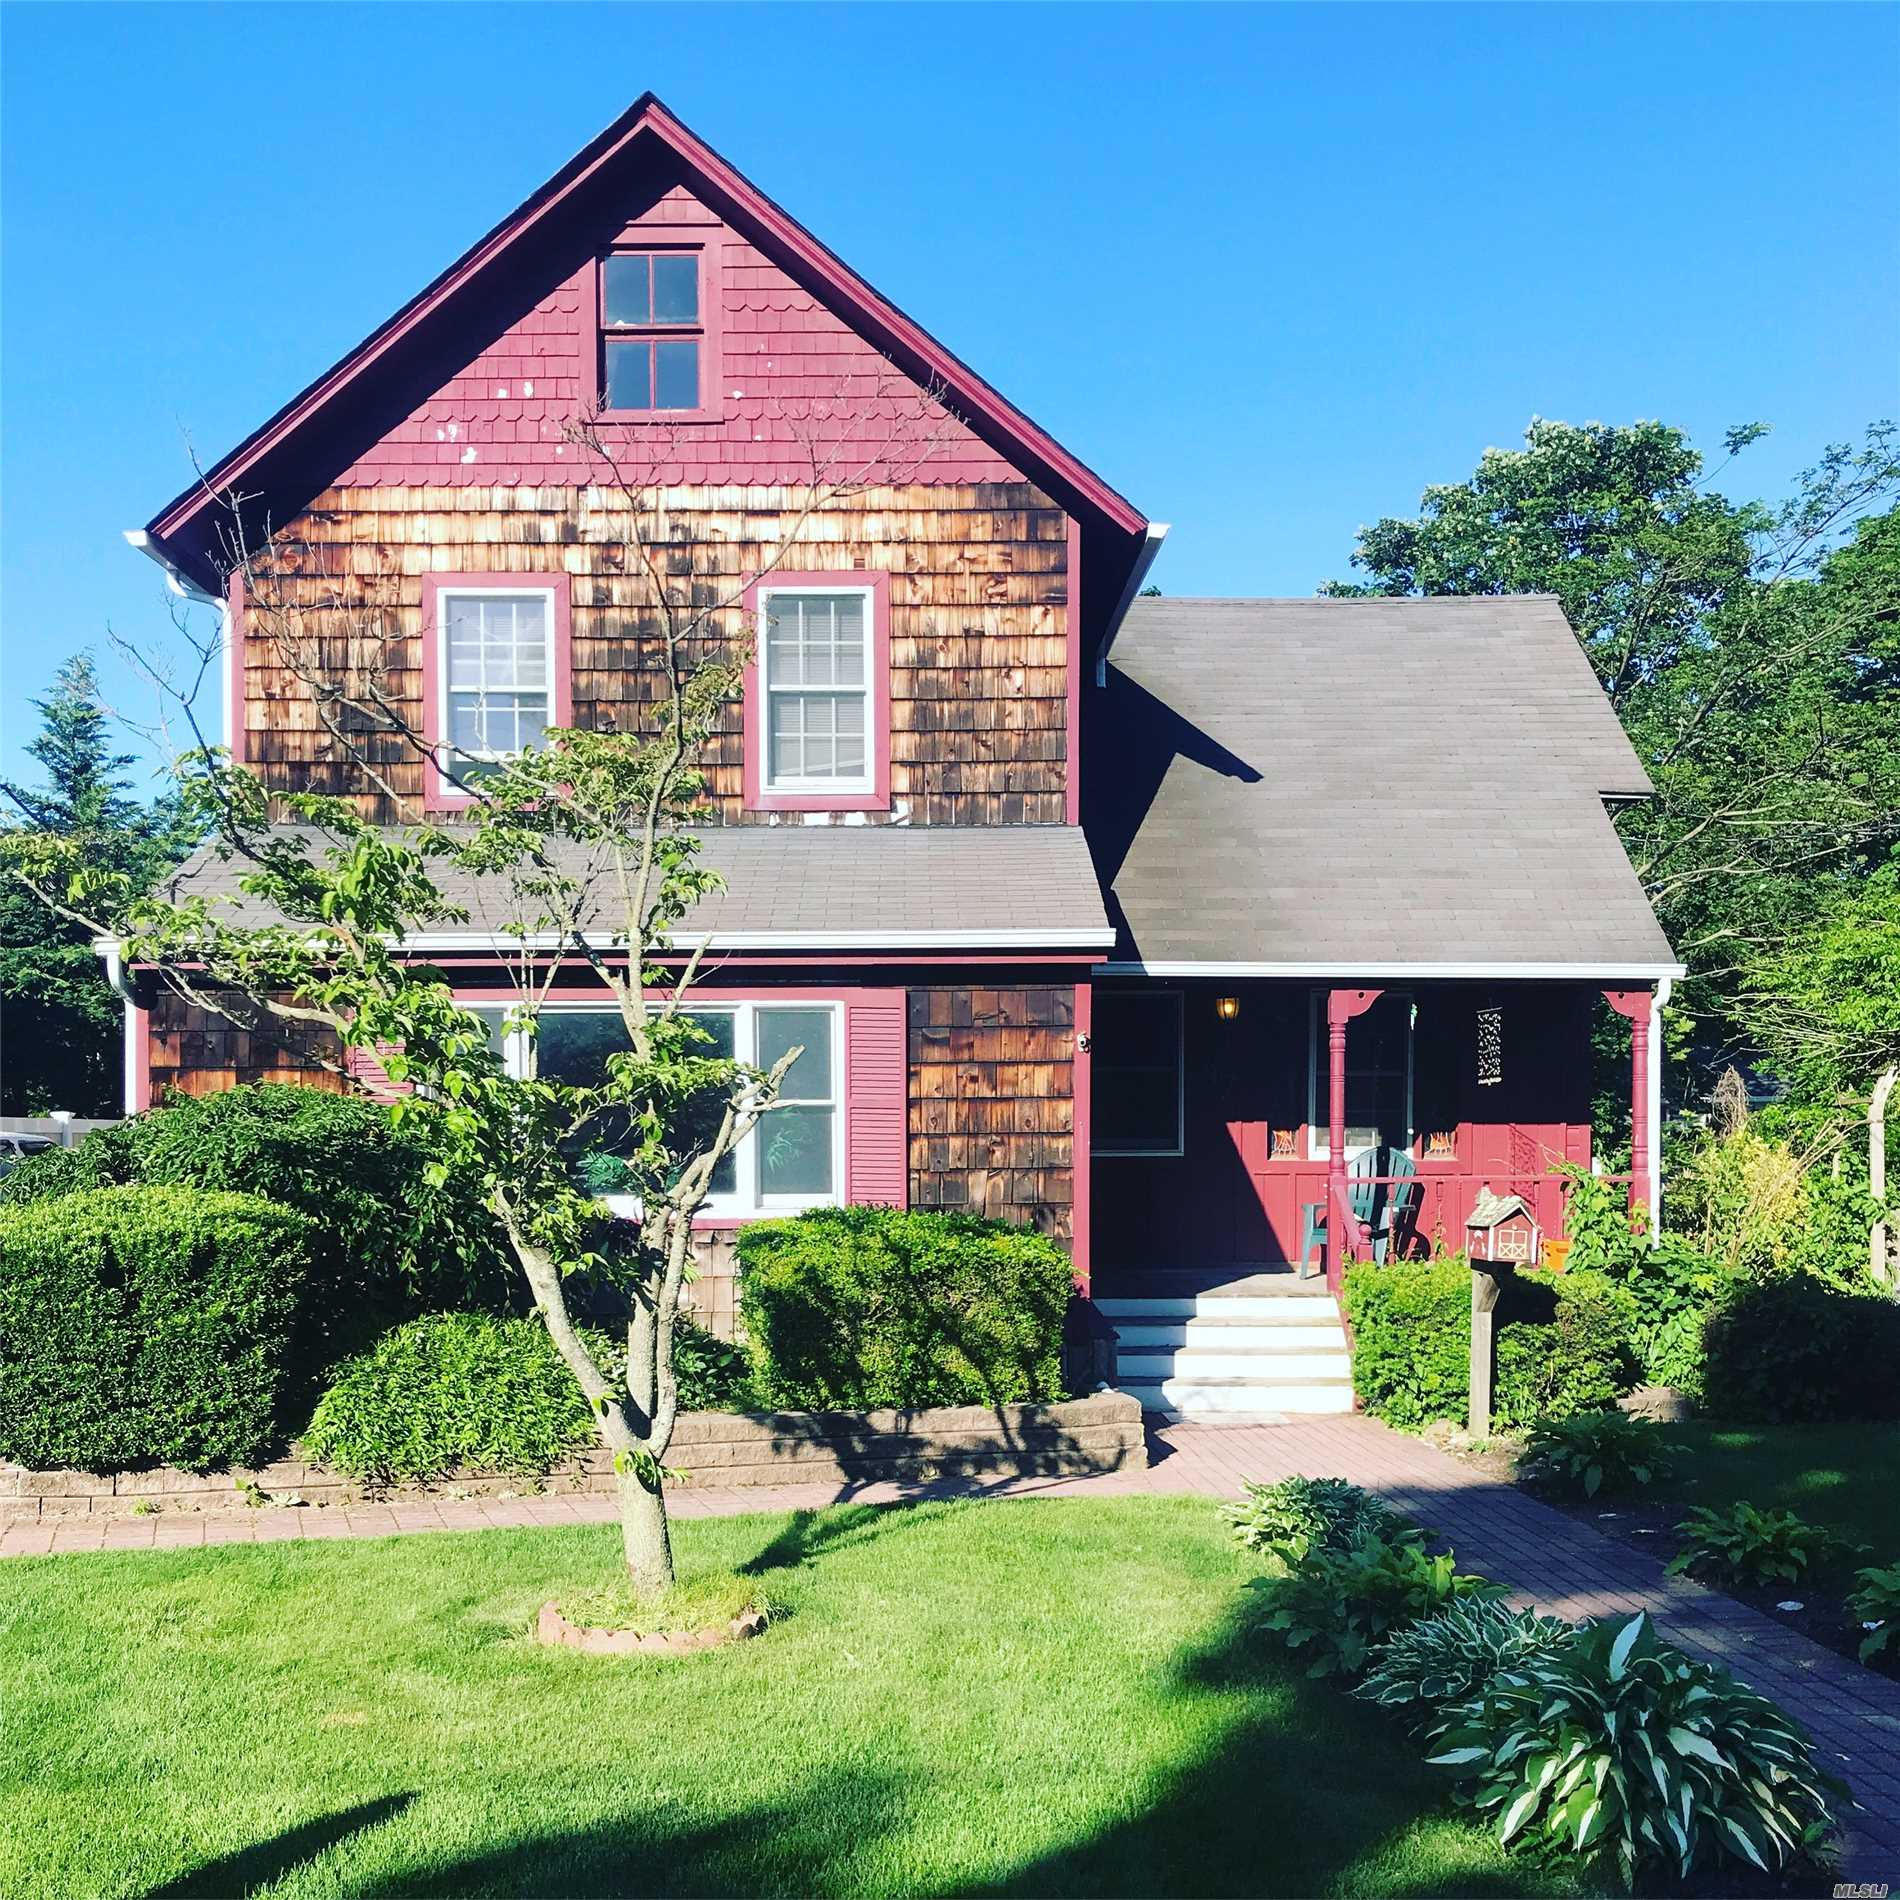 South Of Montauk Colonial. Excellent Location.... This 4 Bed 2 Bath Home Has A Welcoming Front Porch And An Inground Pool. Walking Distance To Town, Library, Islip Beach, Neighborhood Deli And Maple Avenue Dock.